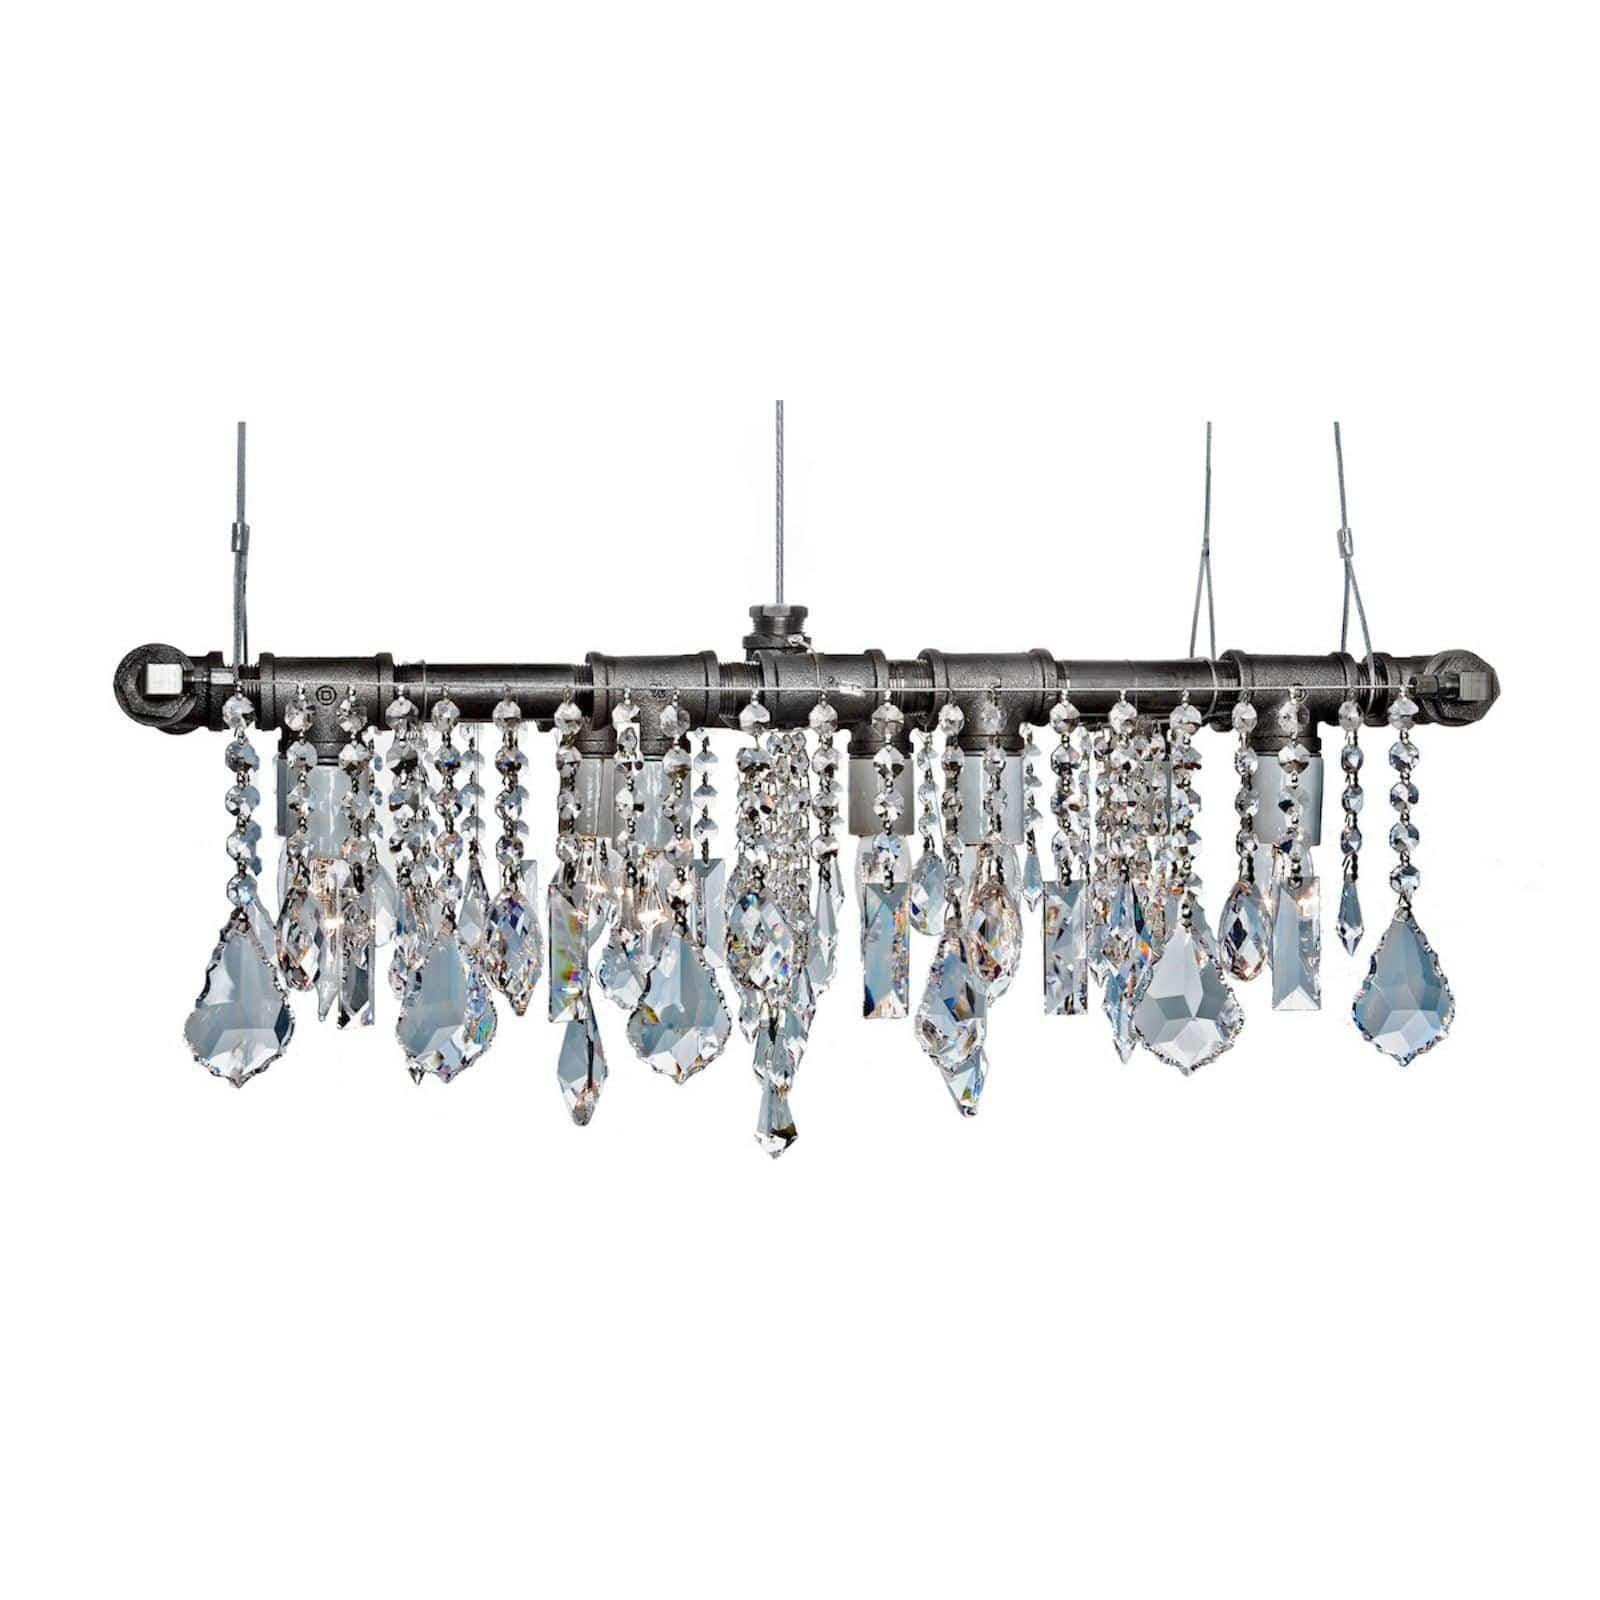 Michael Mchale Designs - Industrial Banqueting Linear Suspension Chandelier - IN-5M | Montreal Lighting & Hardware